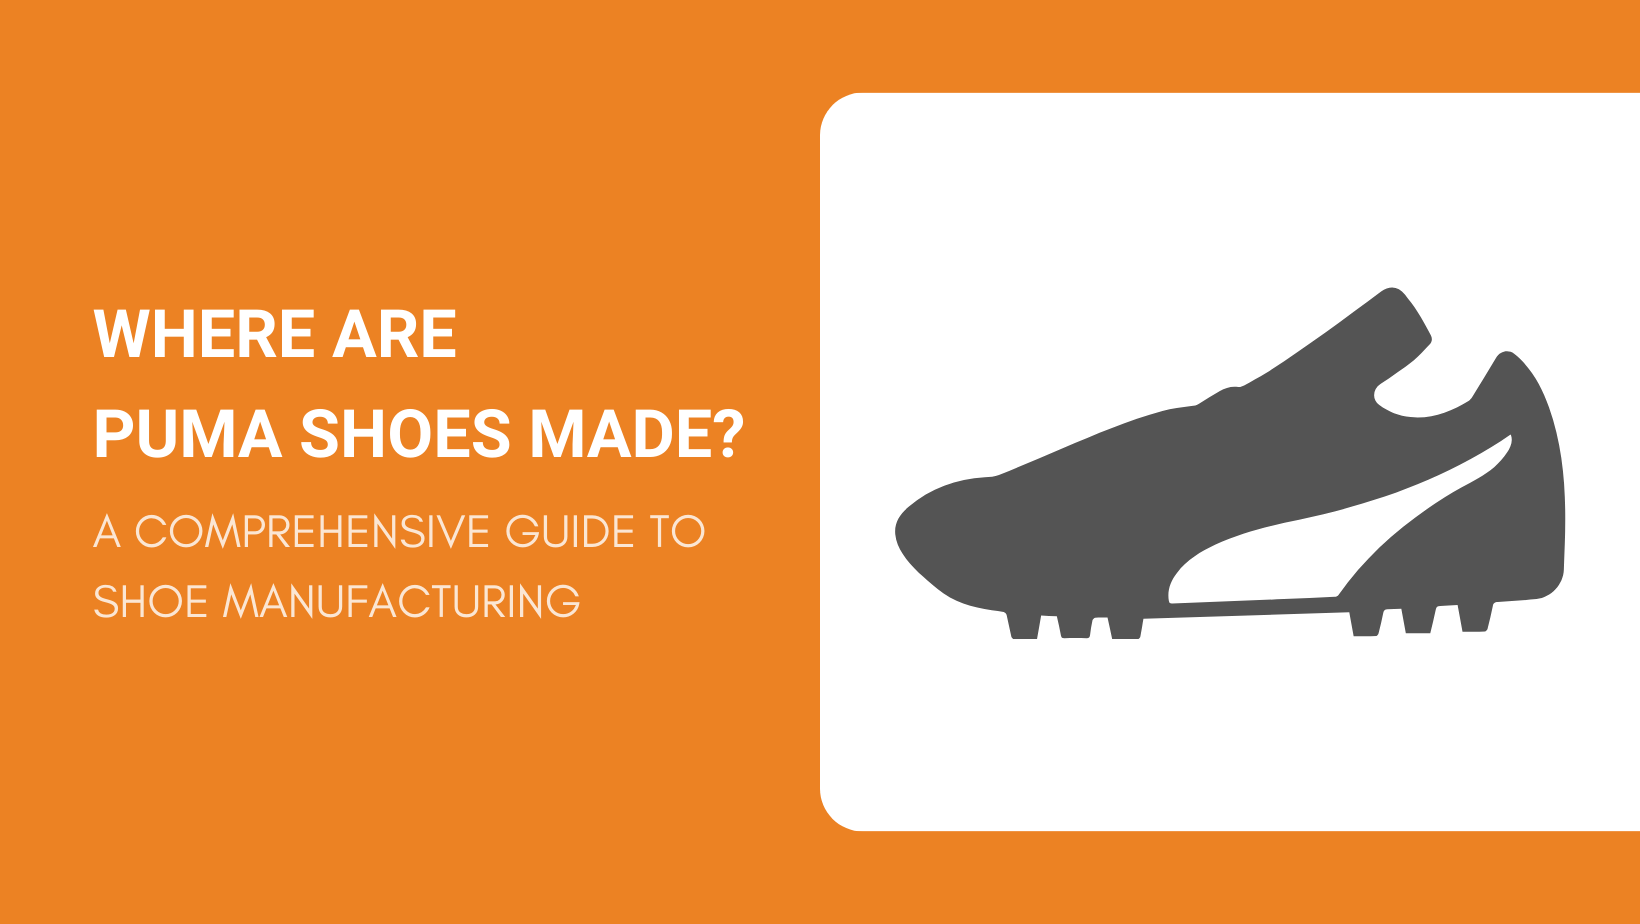 https://cdn.nichedropshipping.com/wp-content/uploads/2023/09/WHERE-ARE-PUMA-SHOES-MADE-A-COMPREHENSIVE-GUIDE-TO-SHOE-MANUFACTURING.png